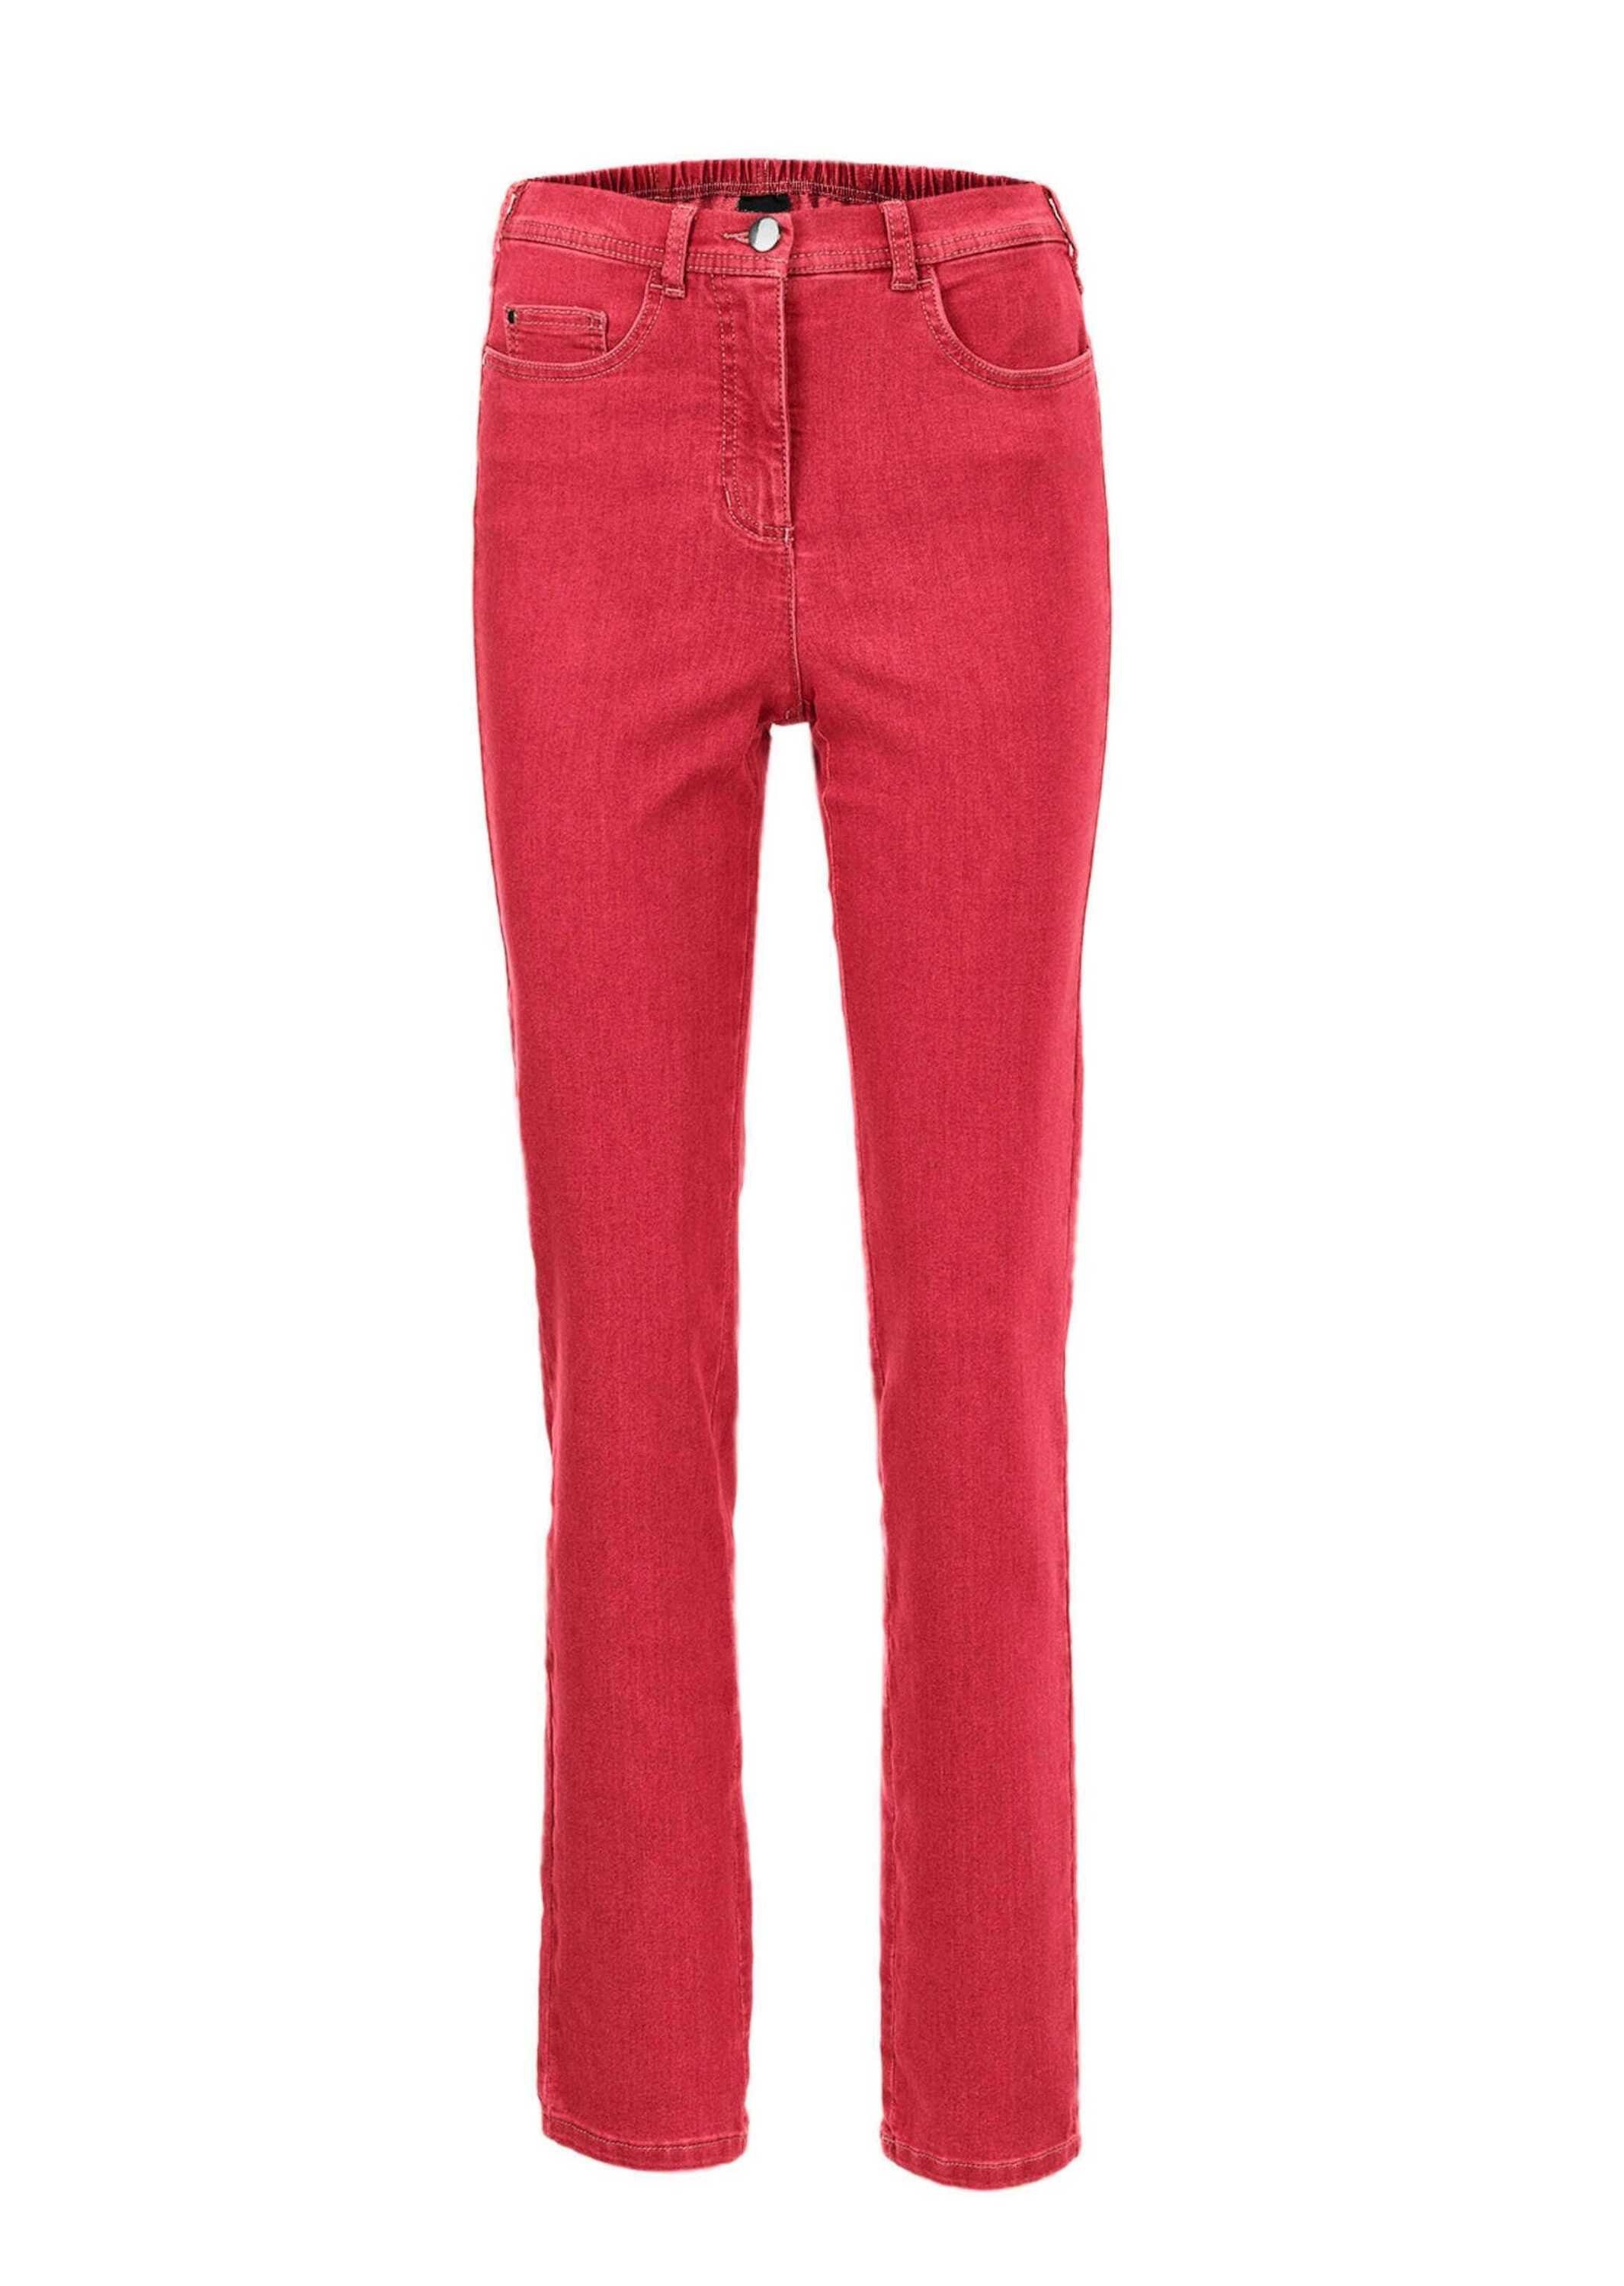 High-Stretch-Jeanshose Bequeme rot GOLDNER Jeans Bequeme